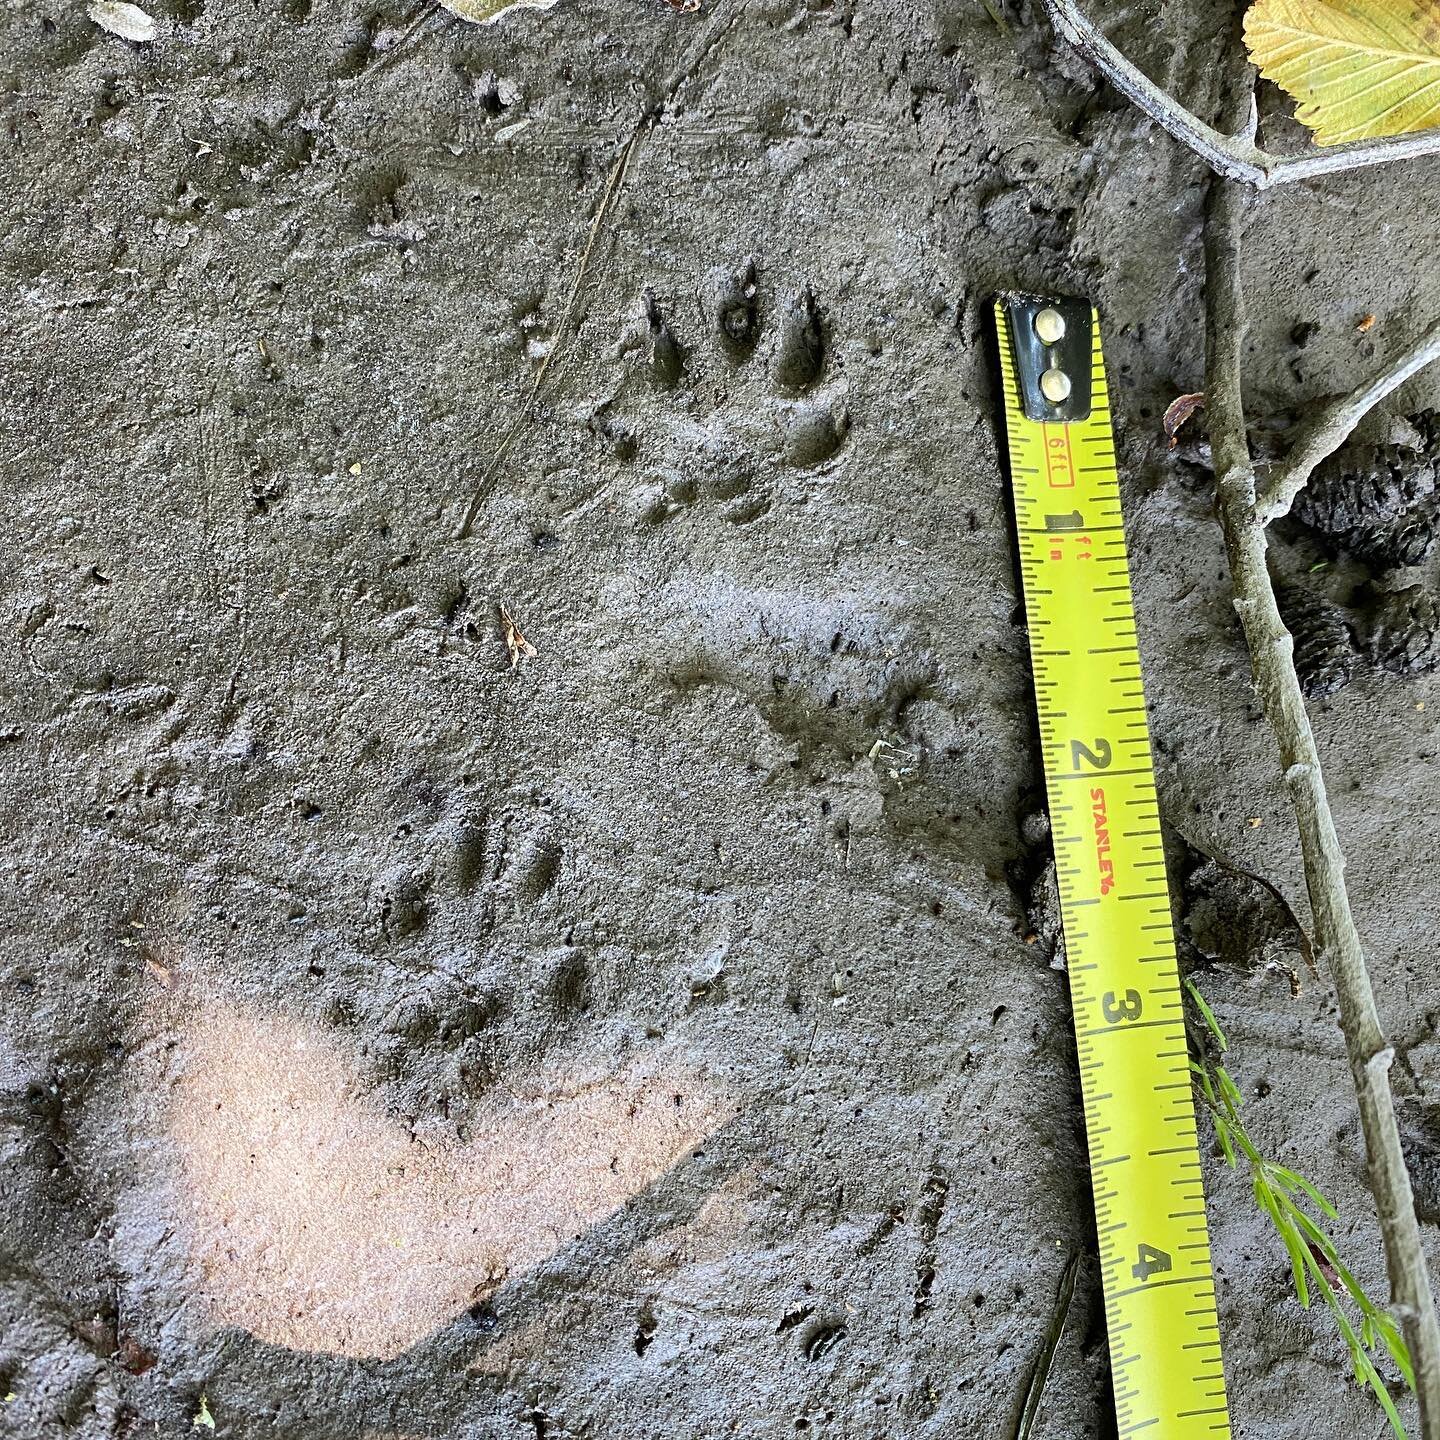 Some of my favorites Ive seen yet -!!! Are you familiar with these tracks? I was torn between two species and after discussing with a few colleagues and @licia_sahagun we believe they are from a small or young/juvenile Mink. They even registered the 